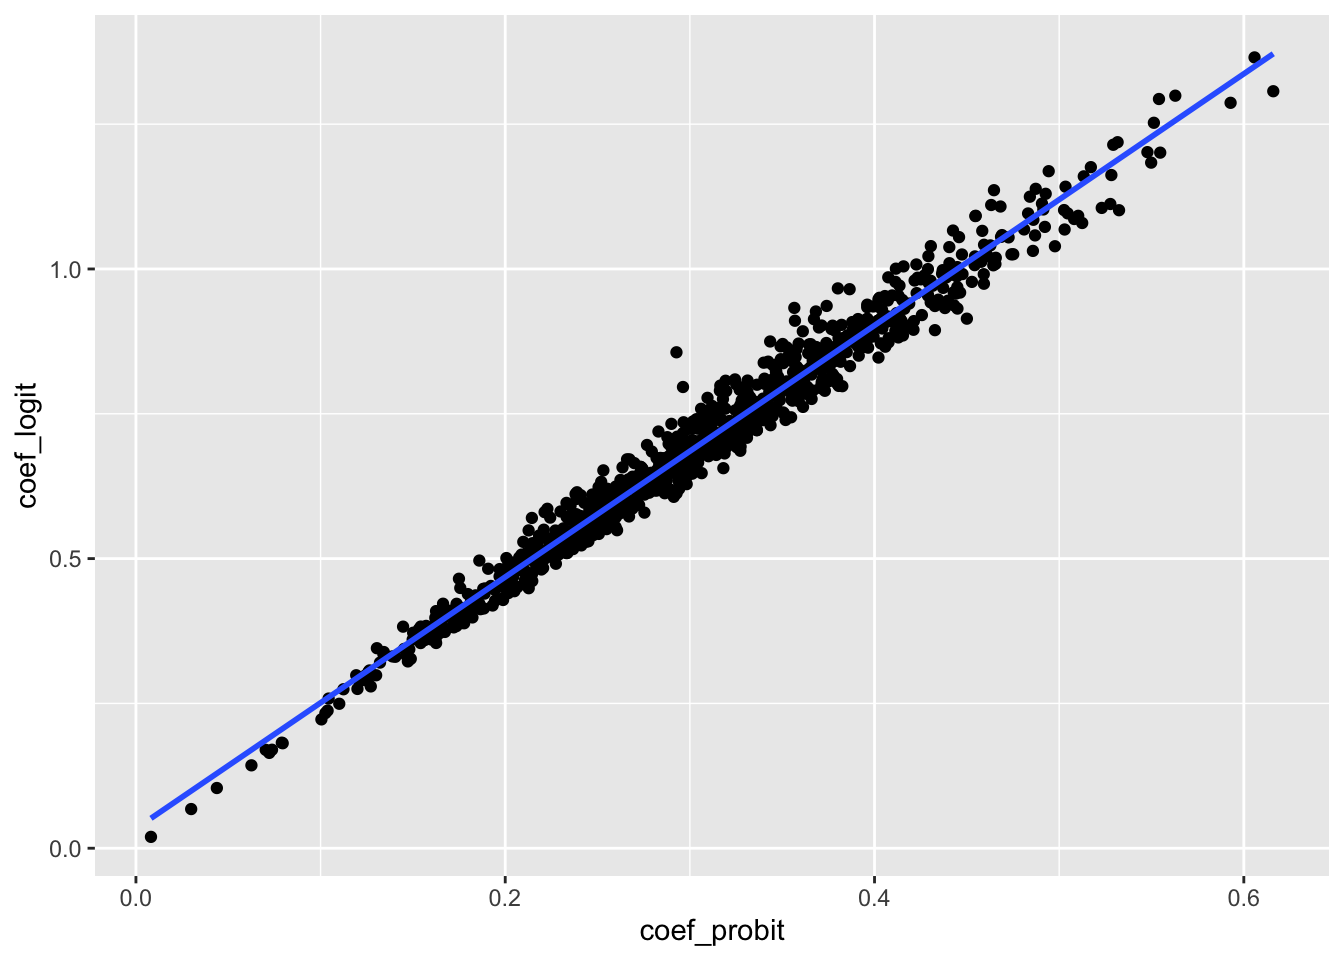 Scatterplot of probit and logit model coefficient showing almost perfect correlation, as all points are close to the 45-degree line.